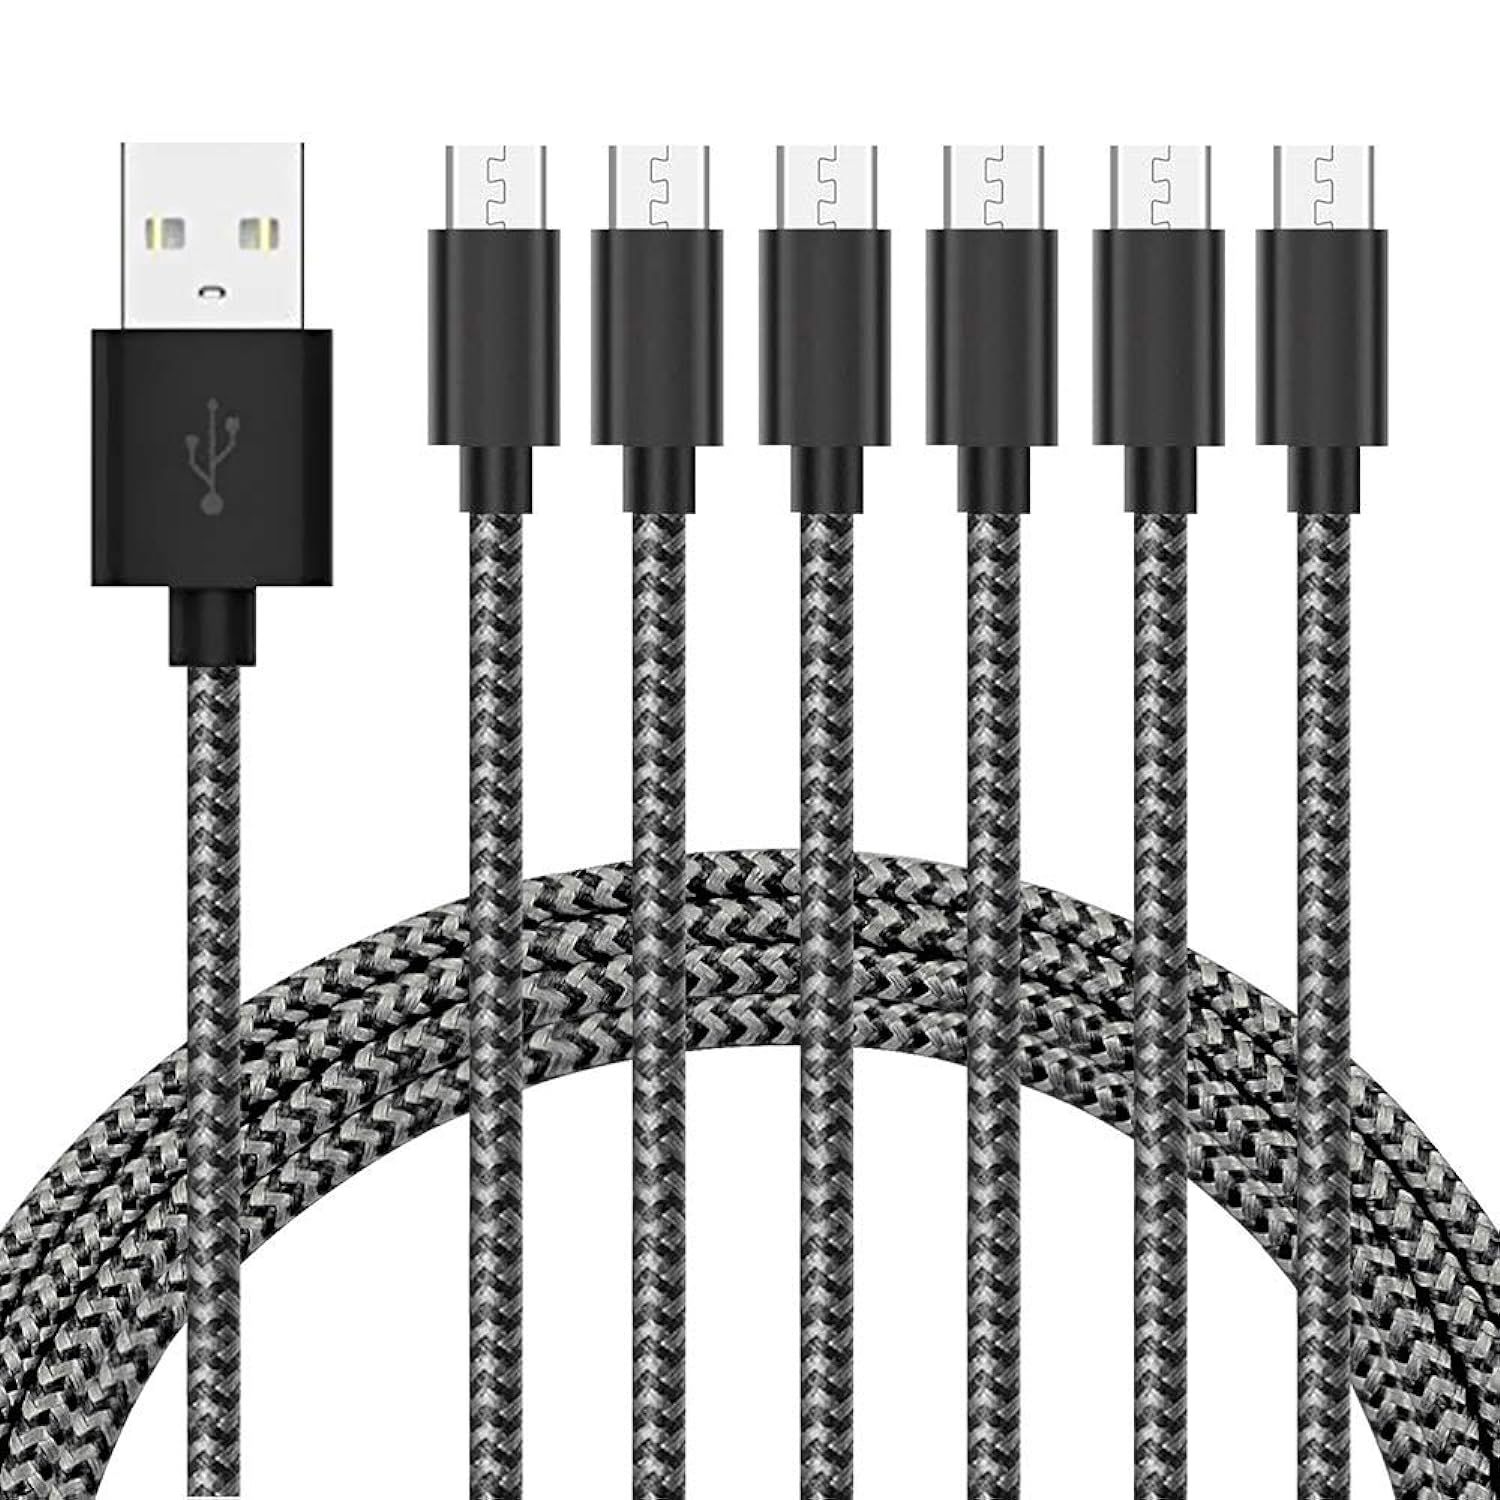 Buy Micro USB Cable 6ft, Cabepow 3 Pack Android Charger Cable